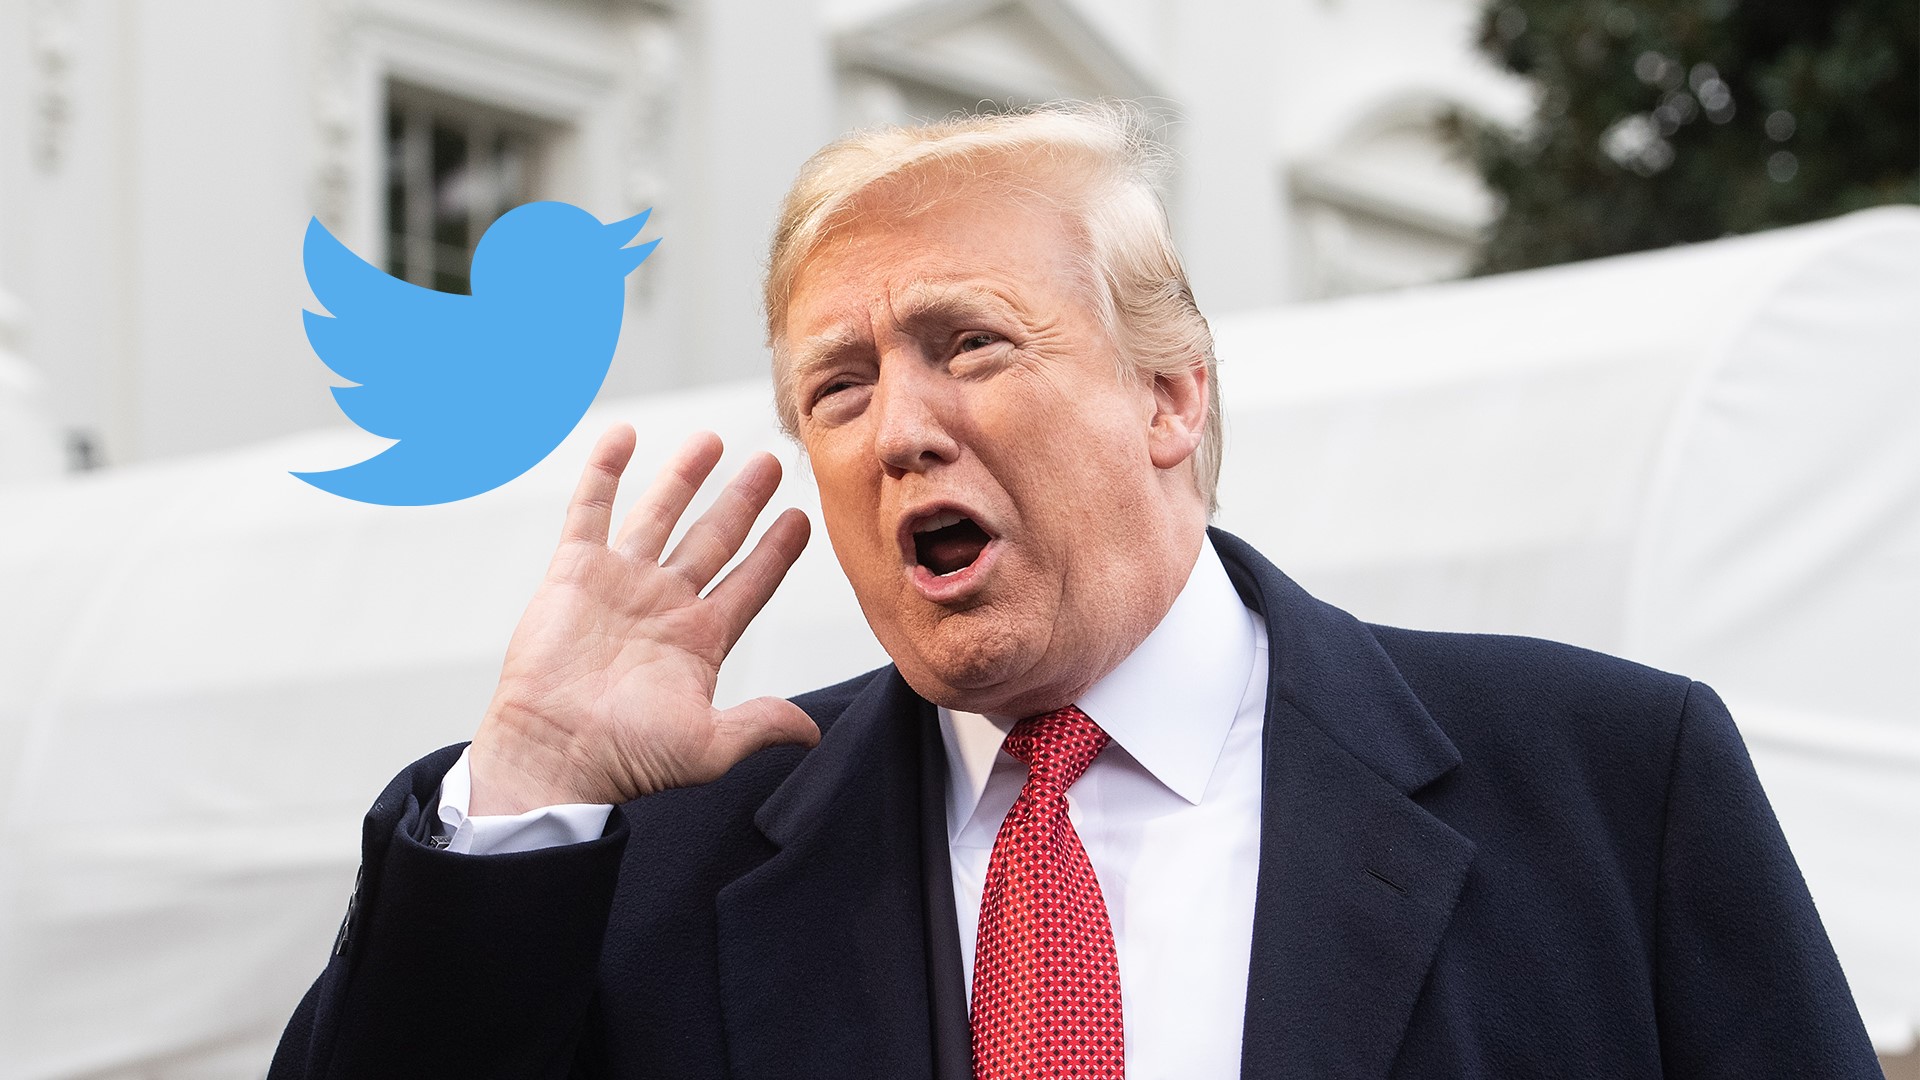 Trump has said in the past that he would not rejoin Twitter even if his account was reinstated.